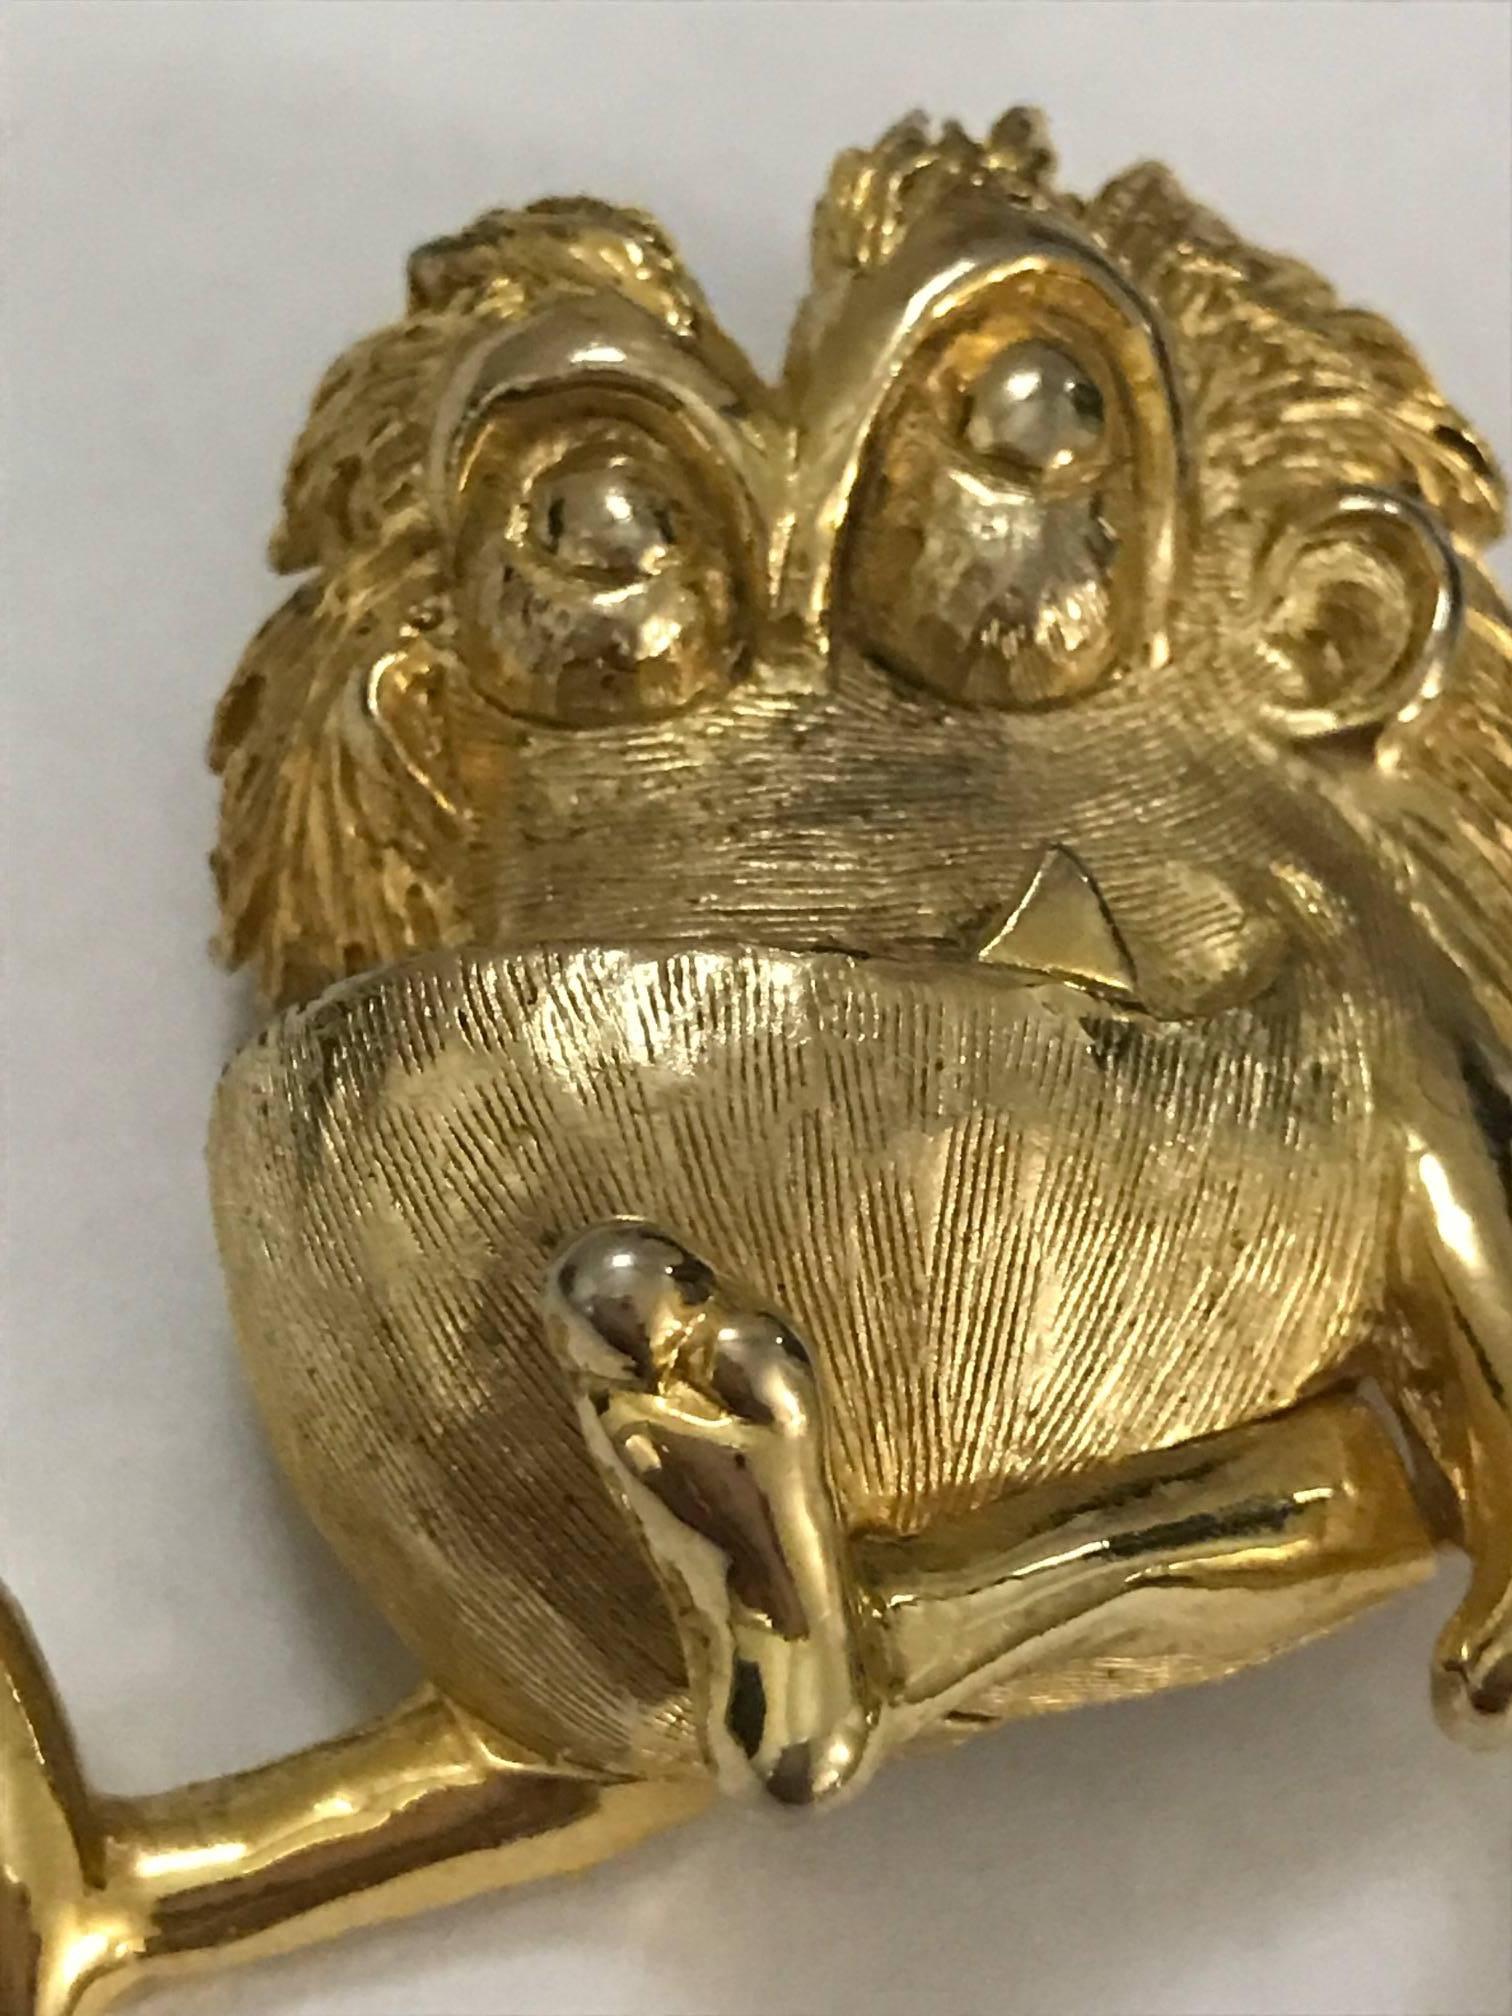 Funny little gold tone monster pin by Hattie Carnegie. Estimated circa 1960's. Great alone or worn in a cluster of brooches.

Signed 'c' and 'Hattie Carnegie' at back.

Approximately 2